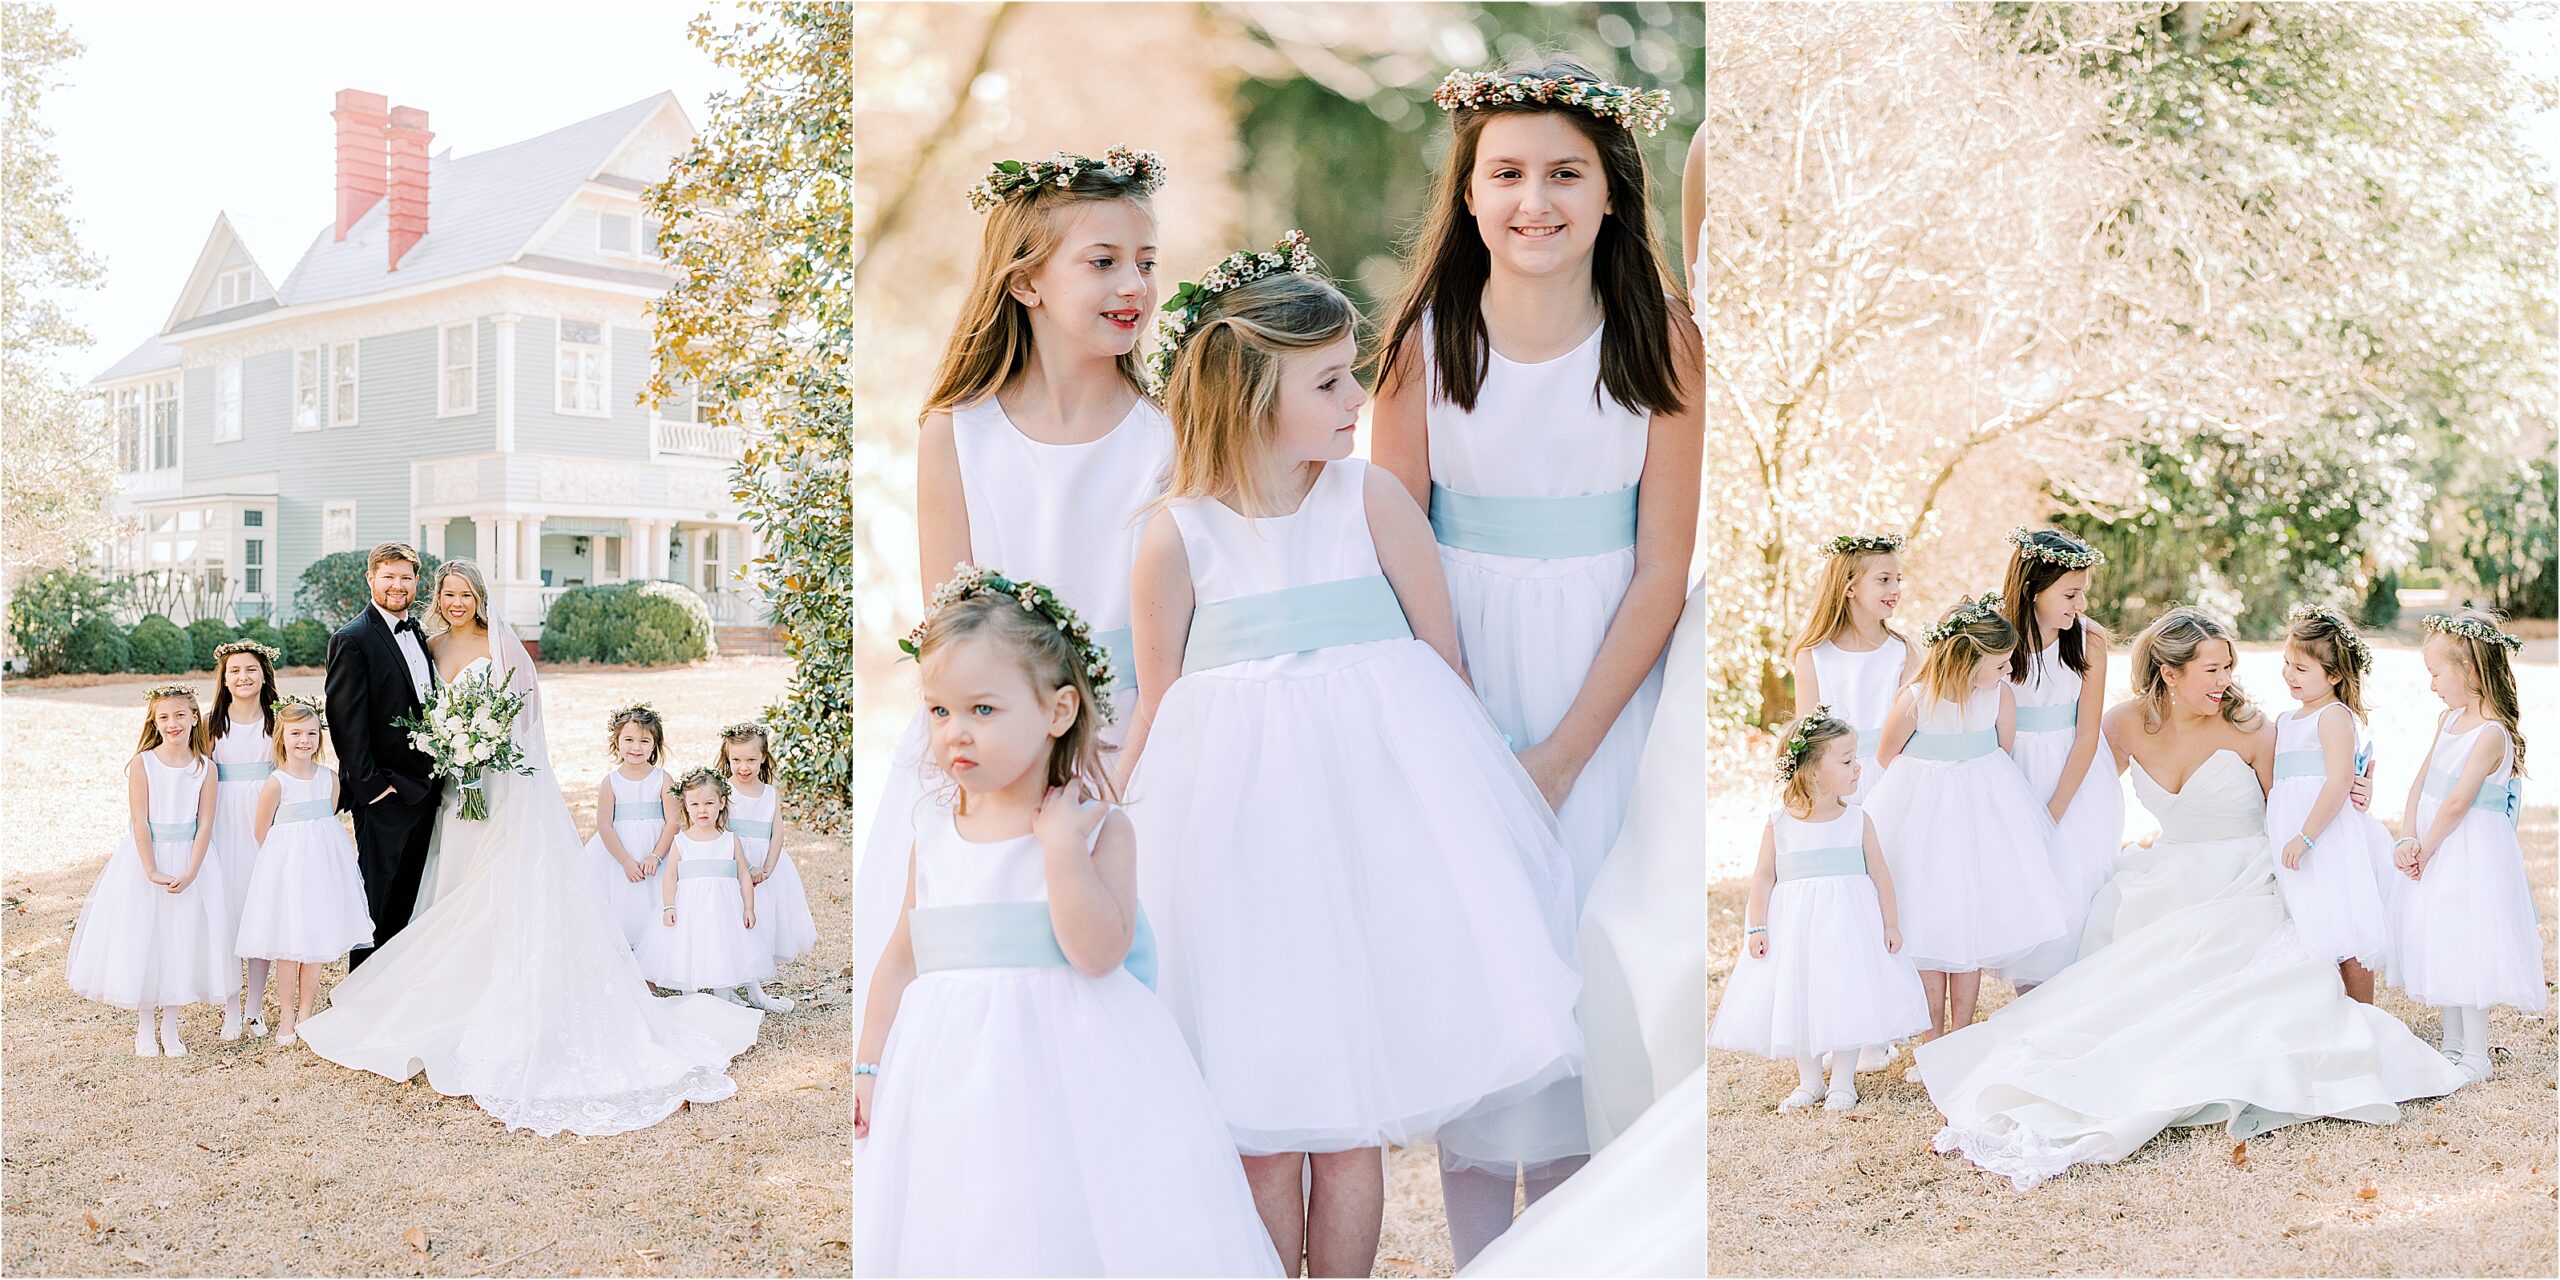 Flower girls in white dresses with blue sashes with flower crowns stand next to the bride a groom.